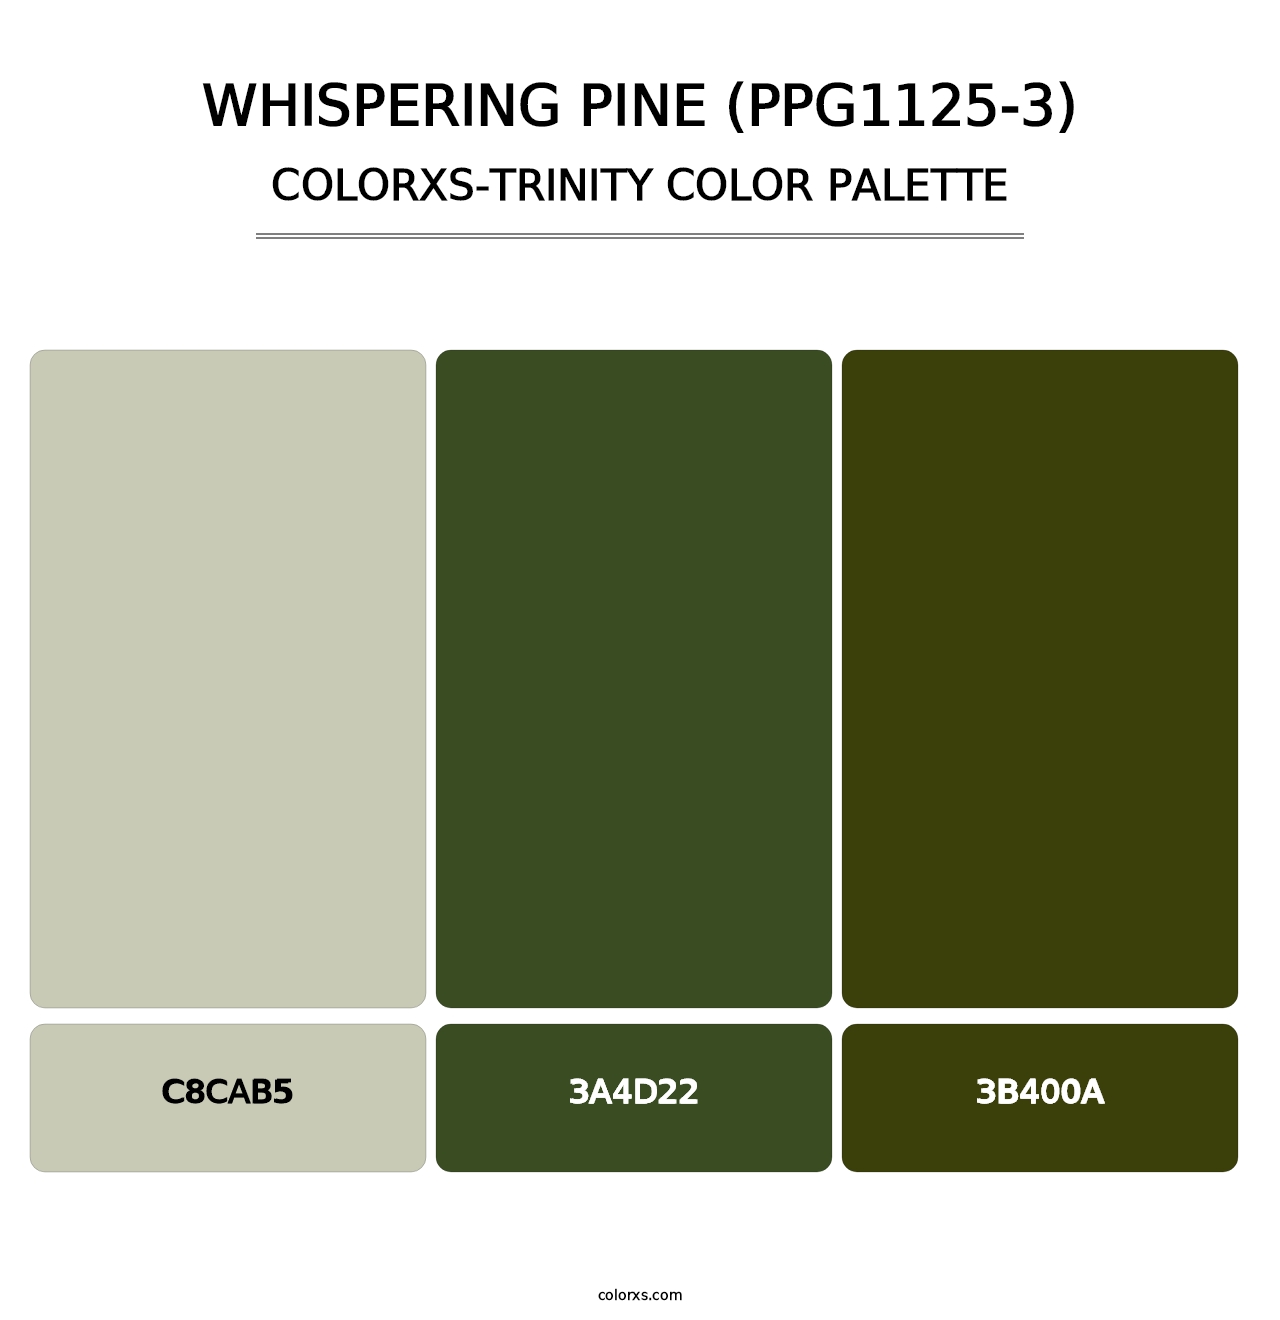 Whispering Pine (PPG1125-3) - Colorxs Trinity Palette